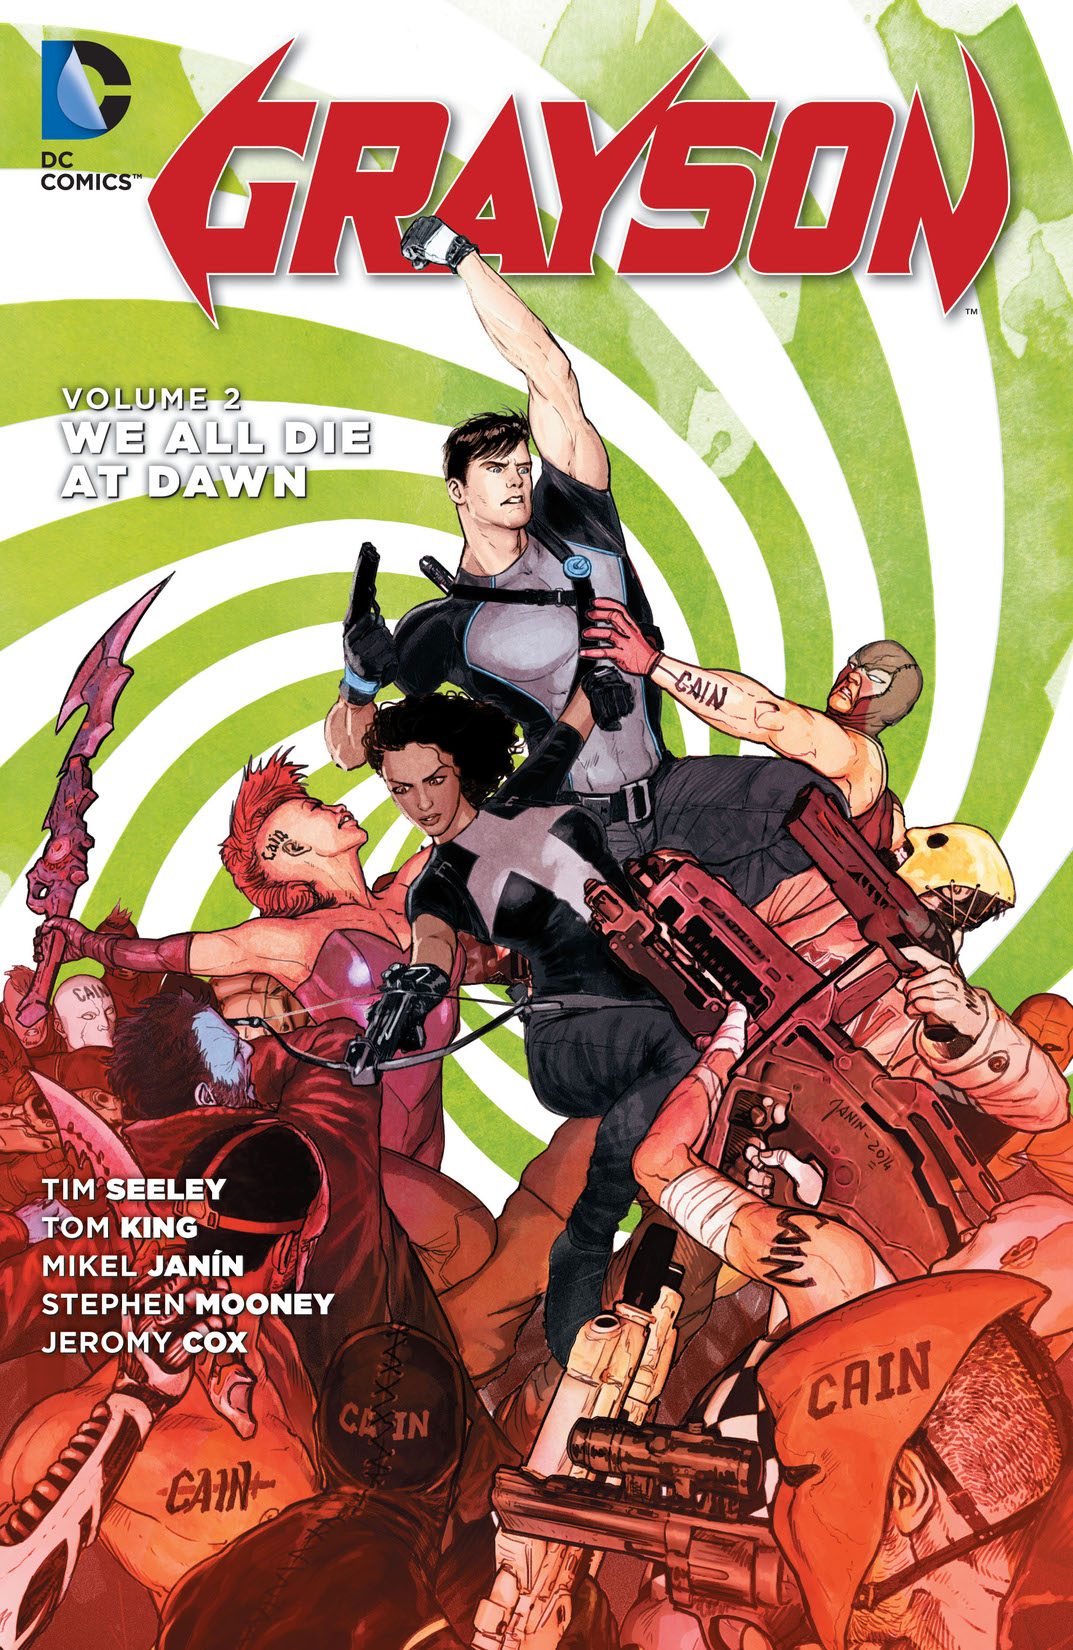 Grayson Vol. 2: We All Die at Dawn preview images